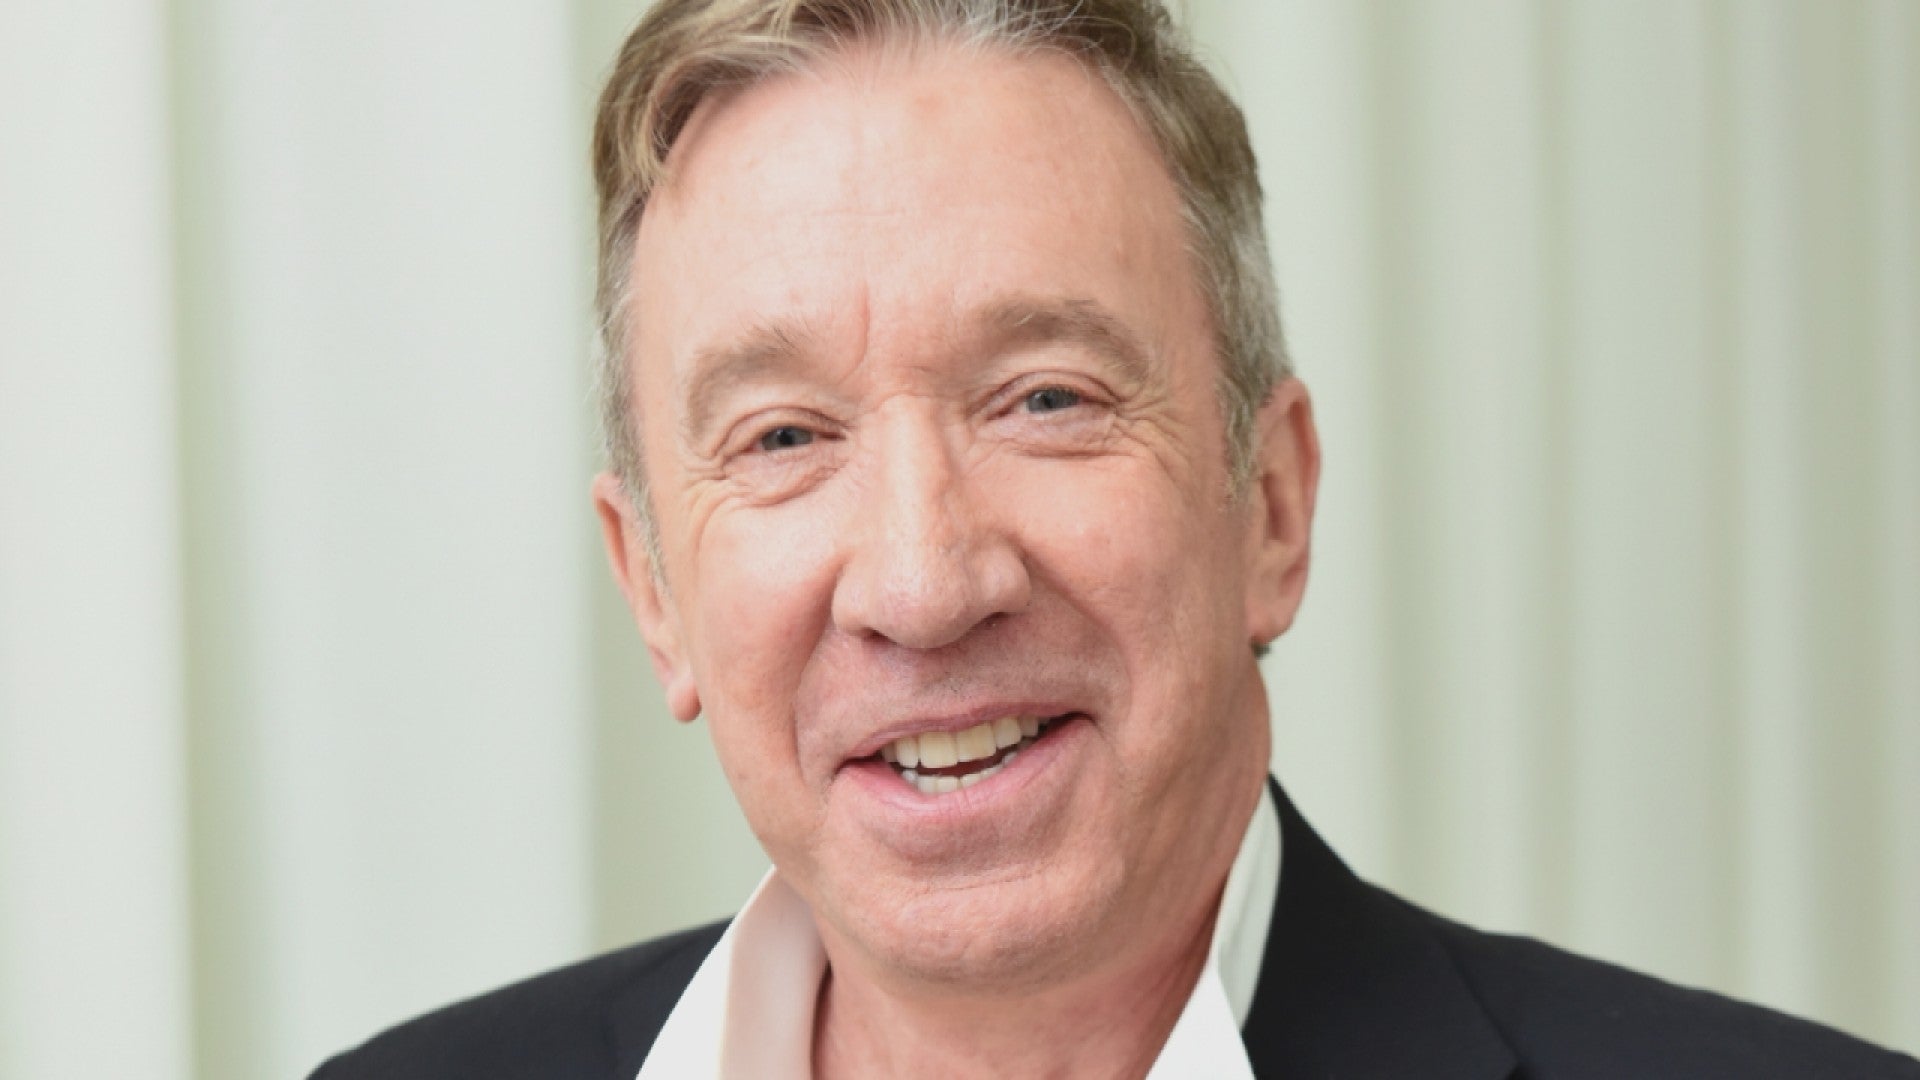 Tim Allen How he stepped into comedy? His net worth?